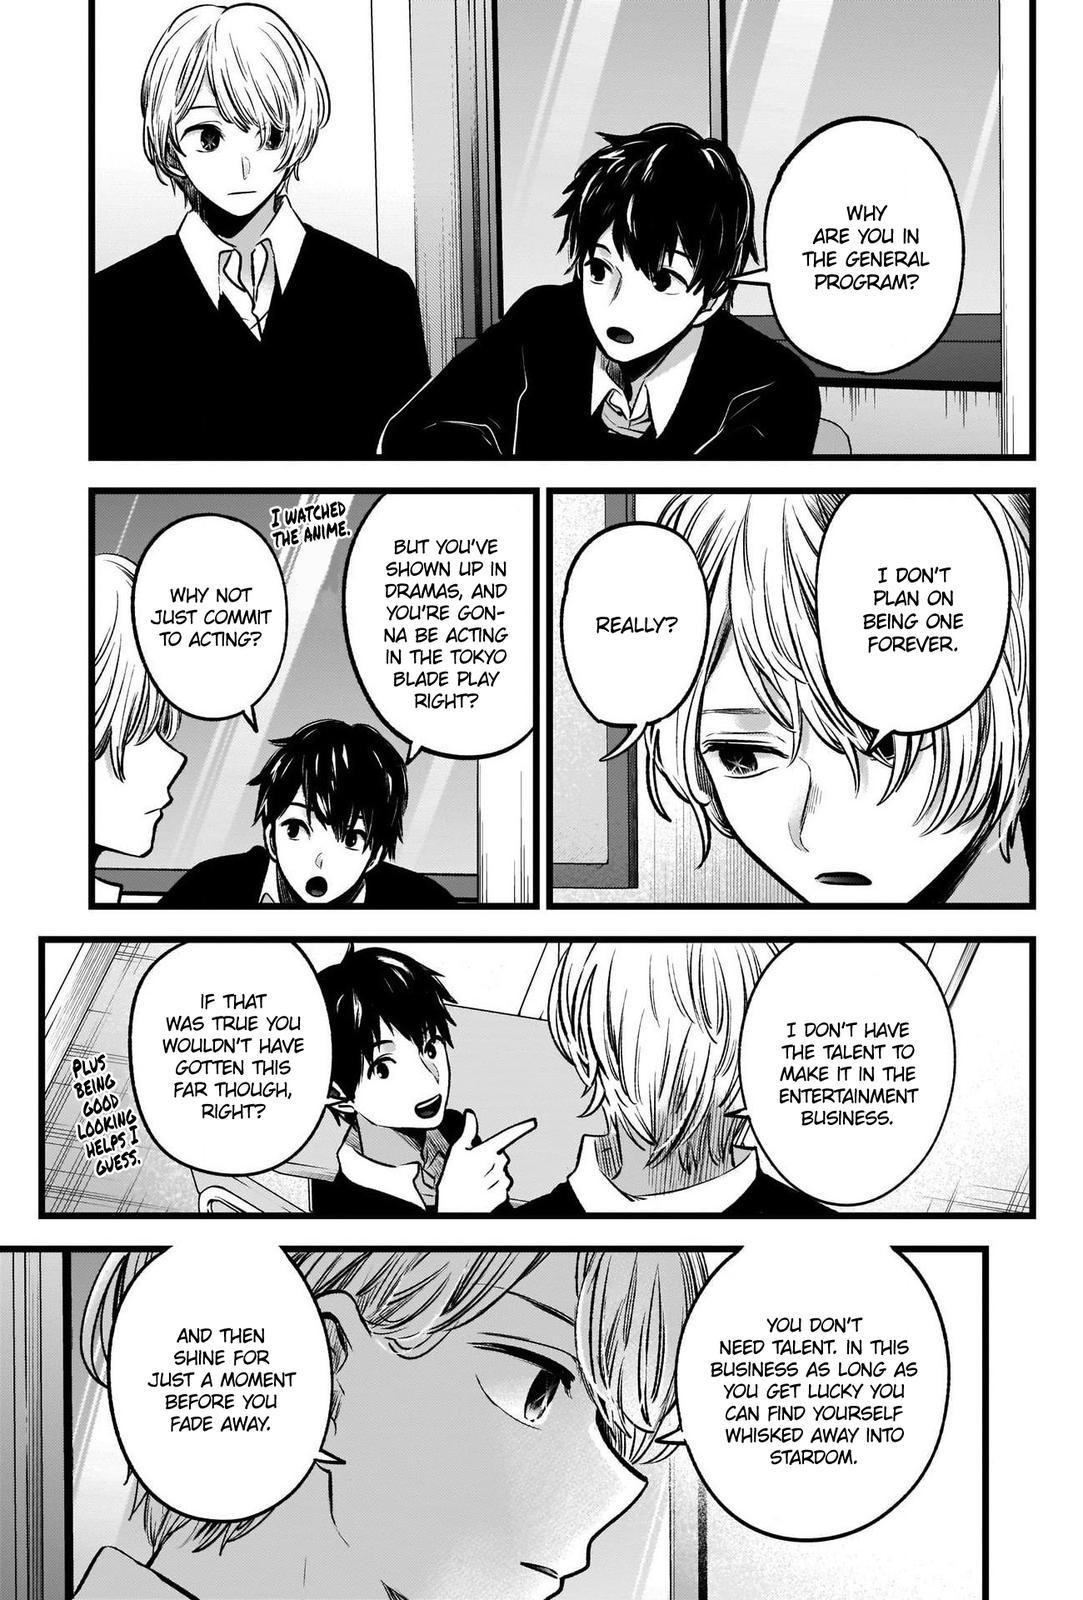 I Can Copy Talents Ch.23 Page 2 - Mangago